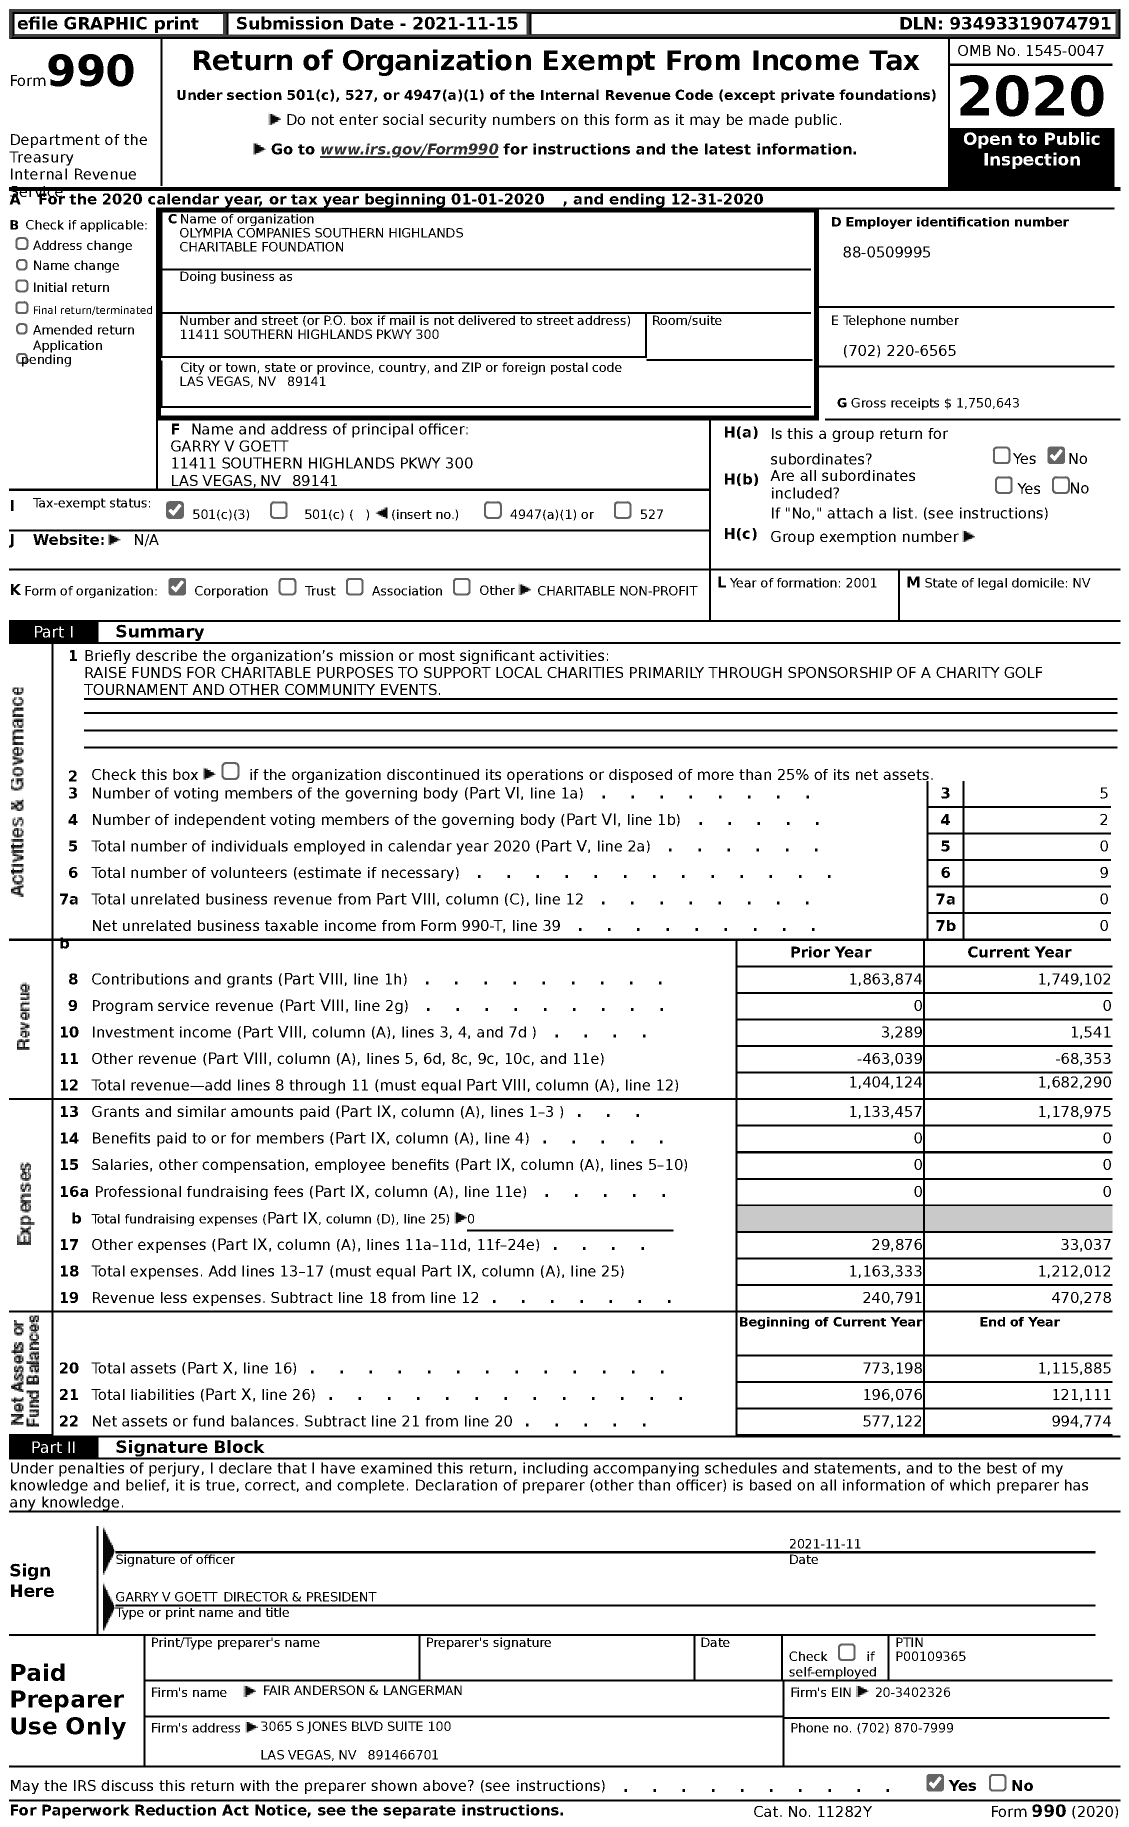 Image of first page of 2020 Form 990 for Olympia Companies Southern Highlands Charitable Foundation